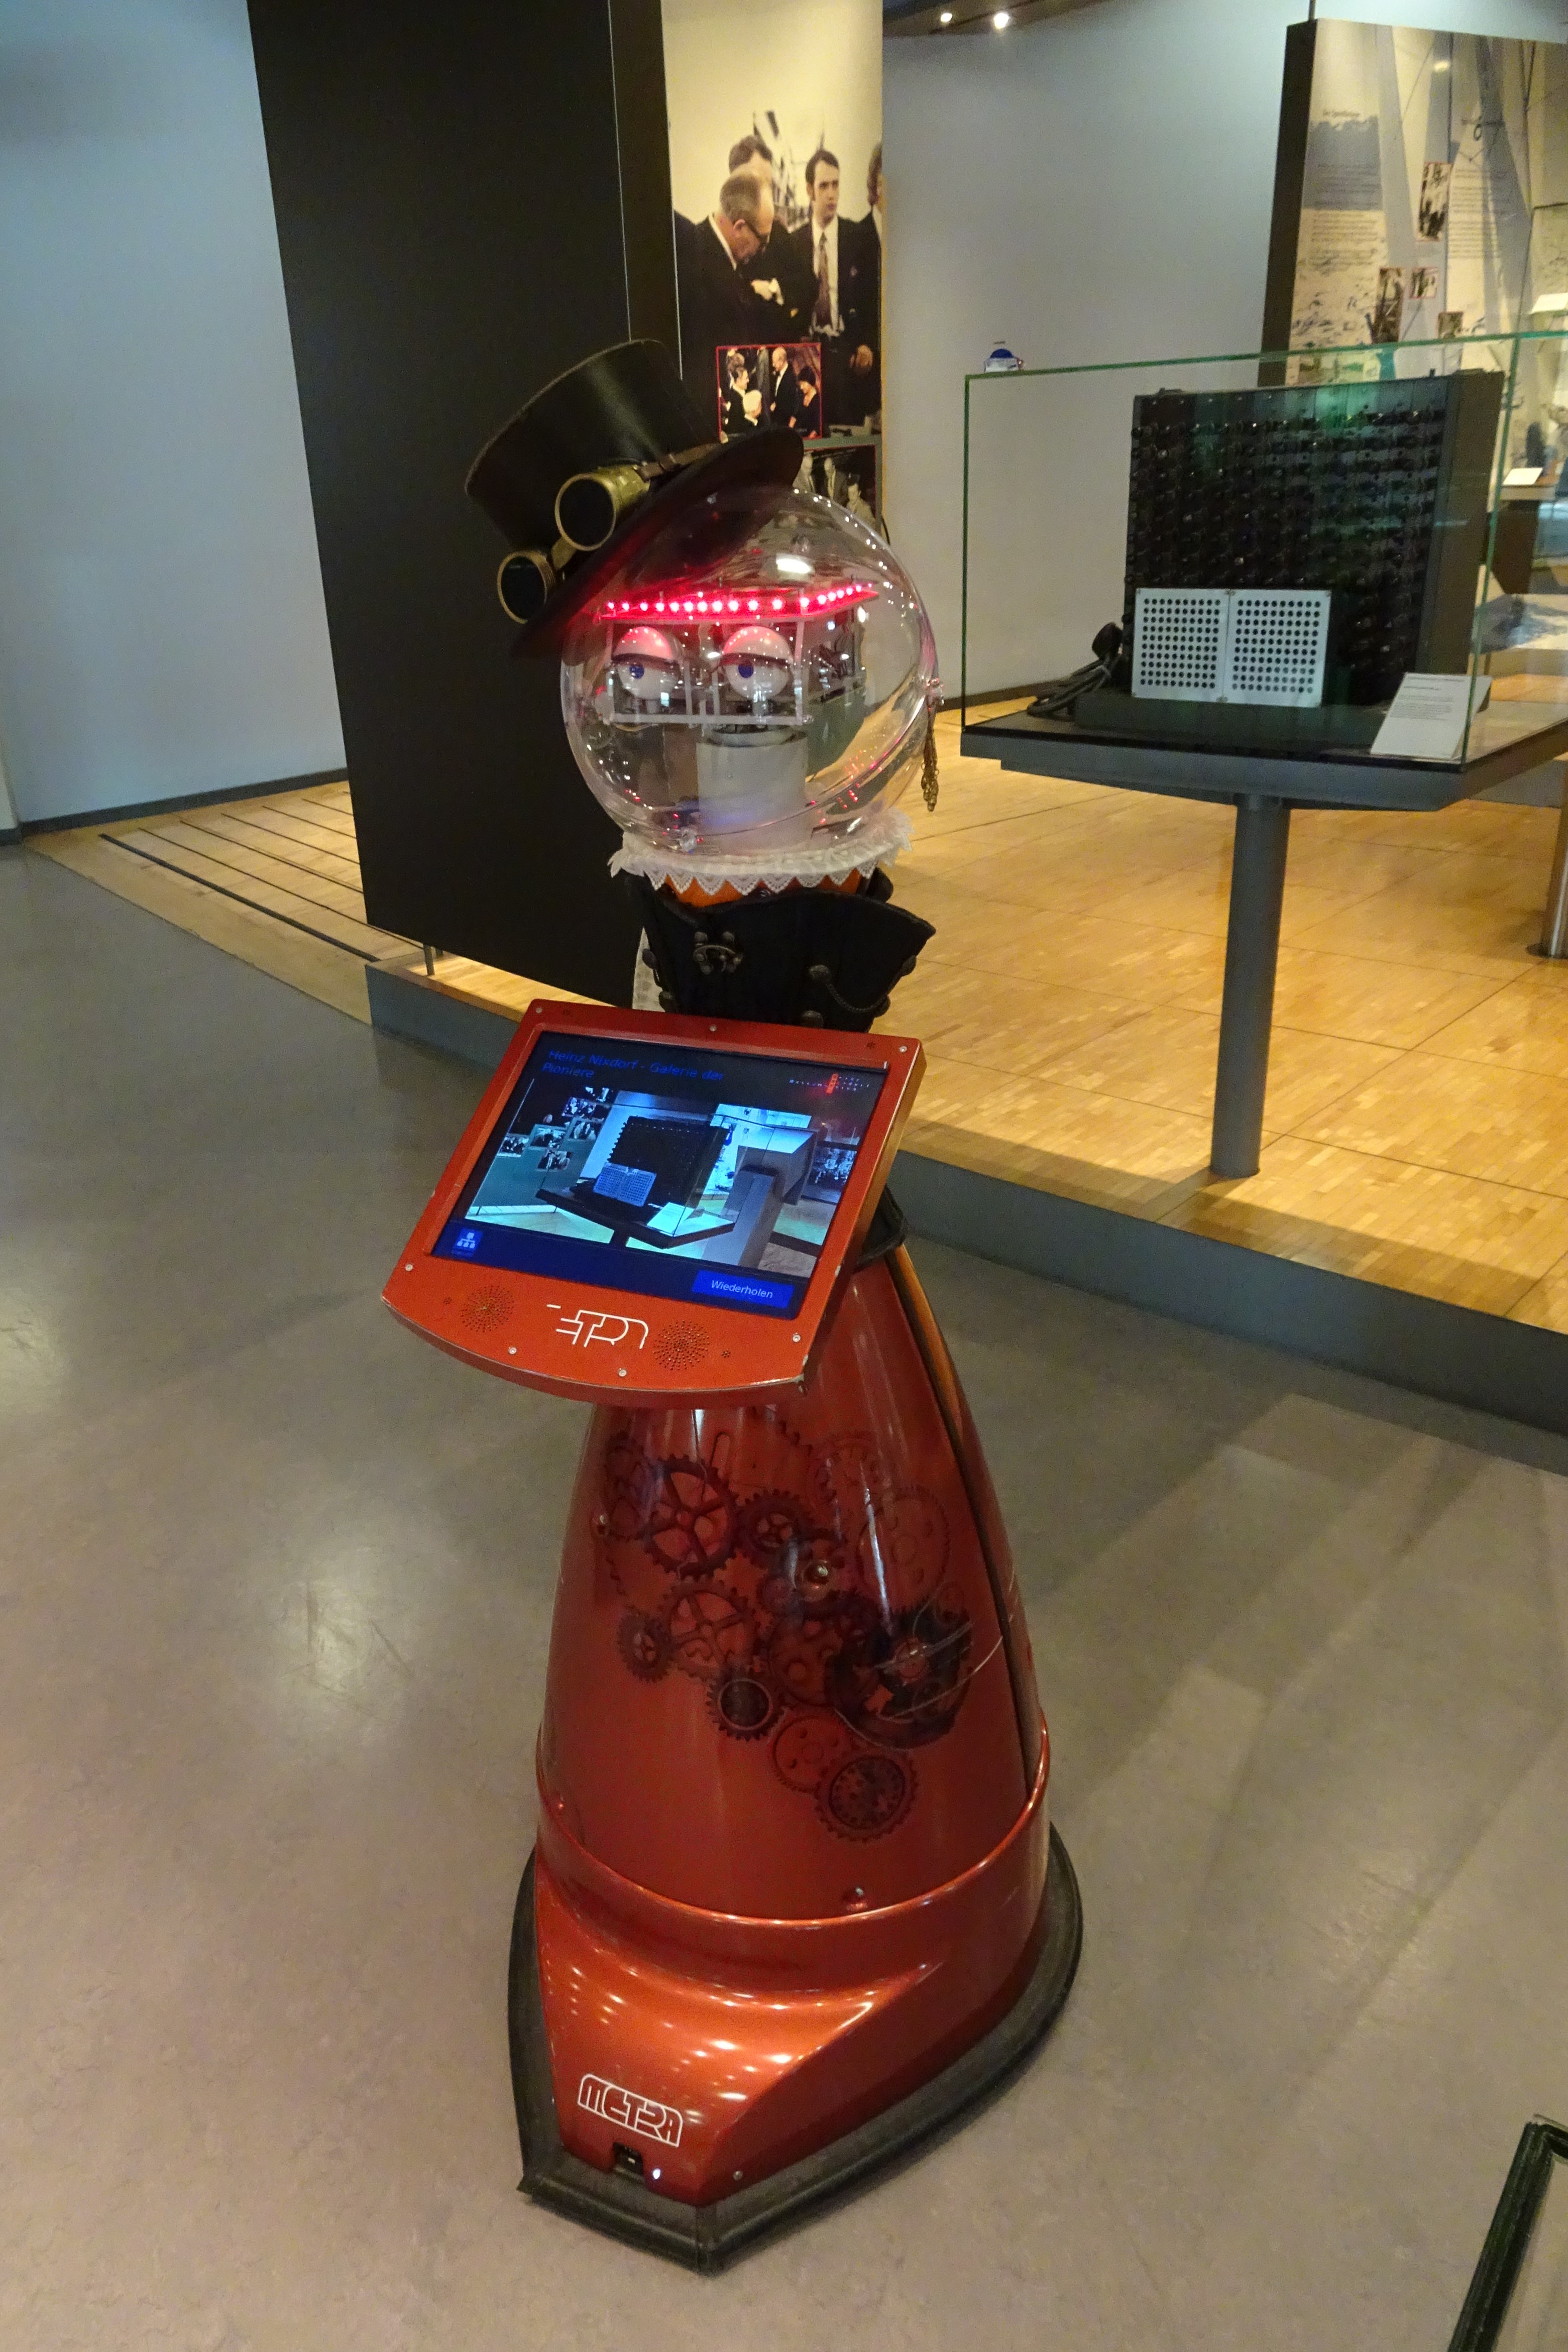 A steampunk-styled museum guide robot